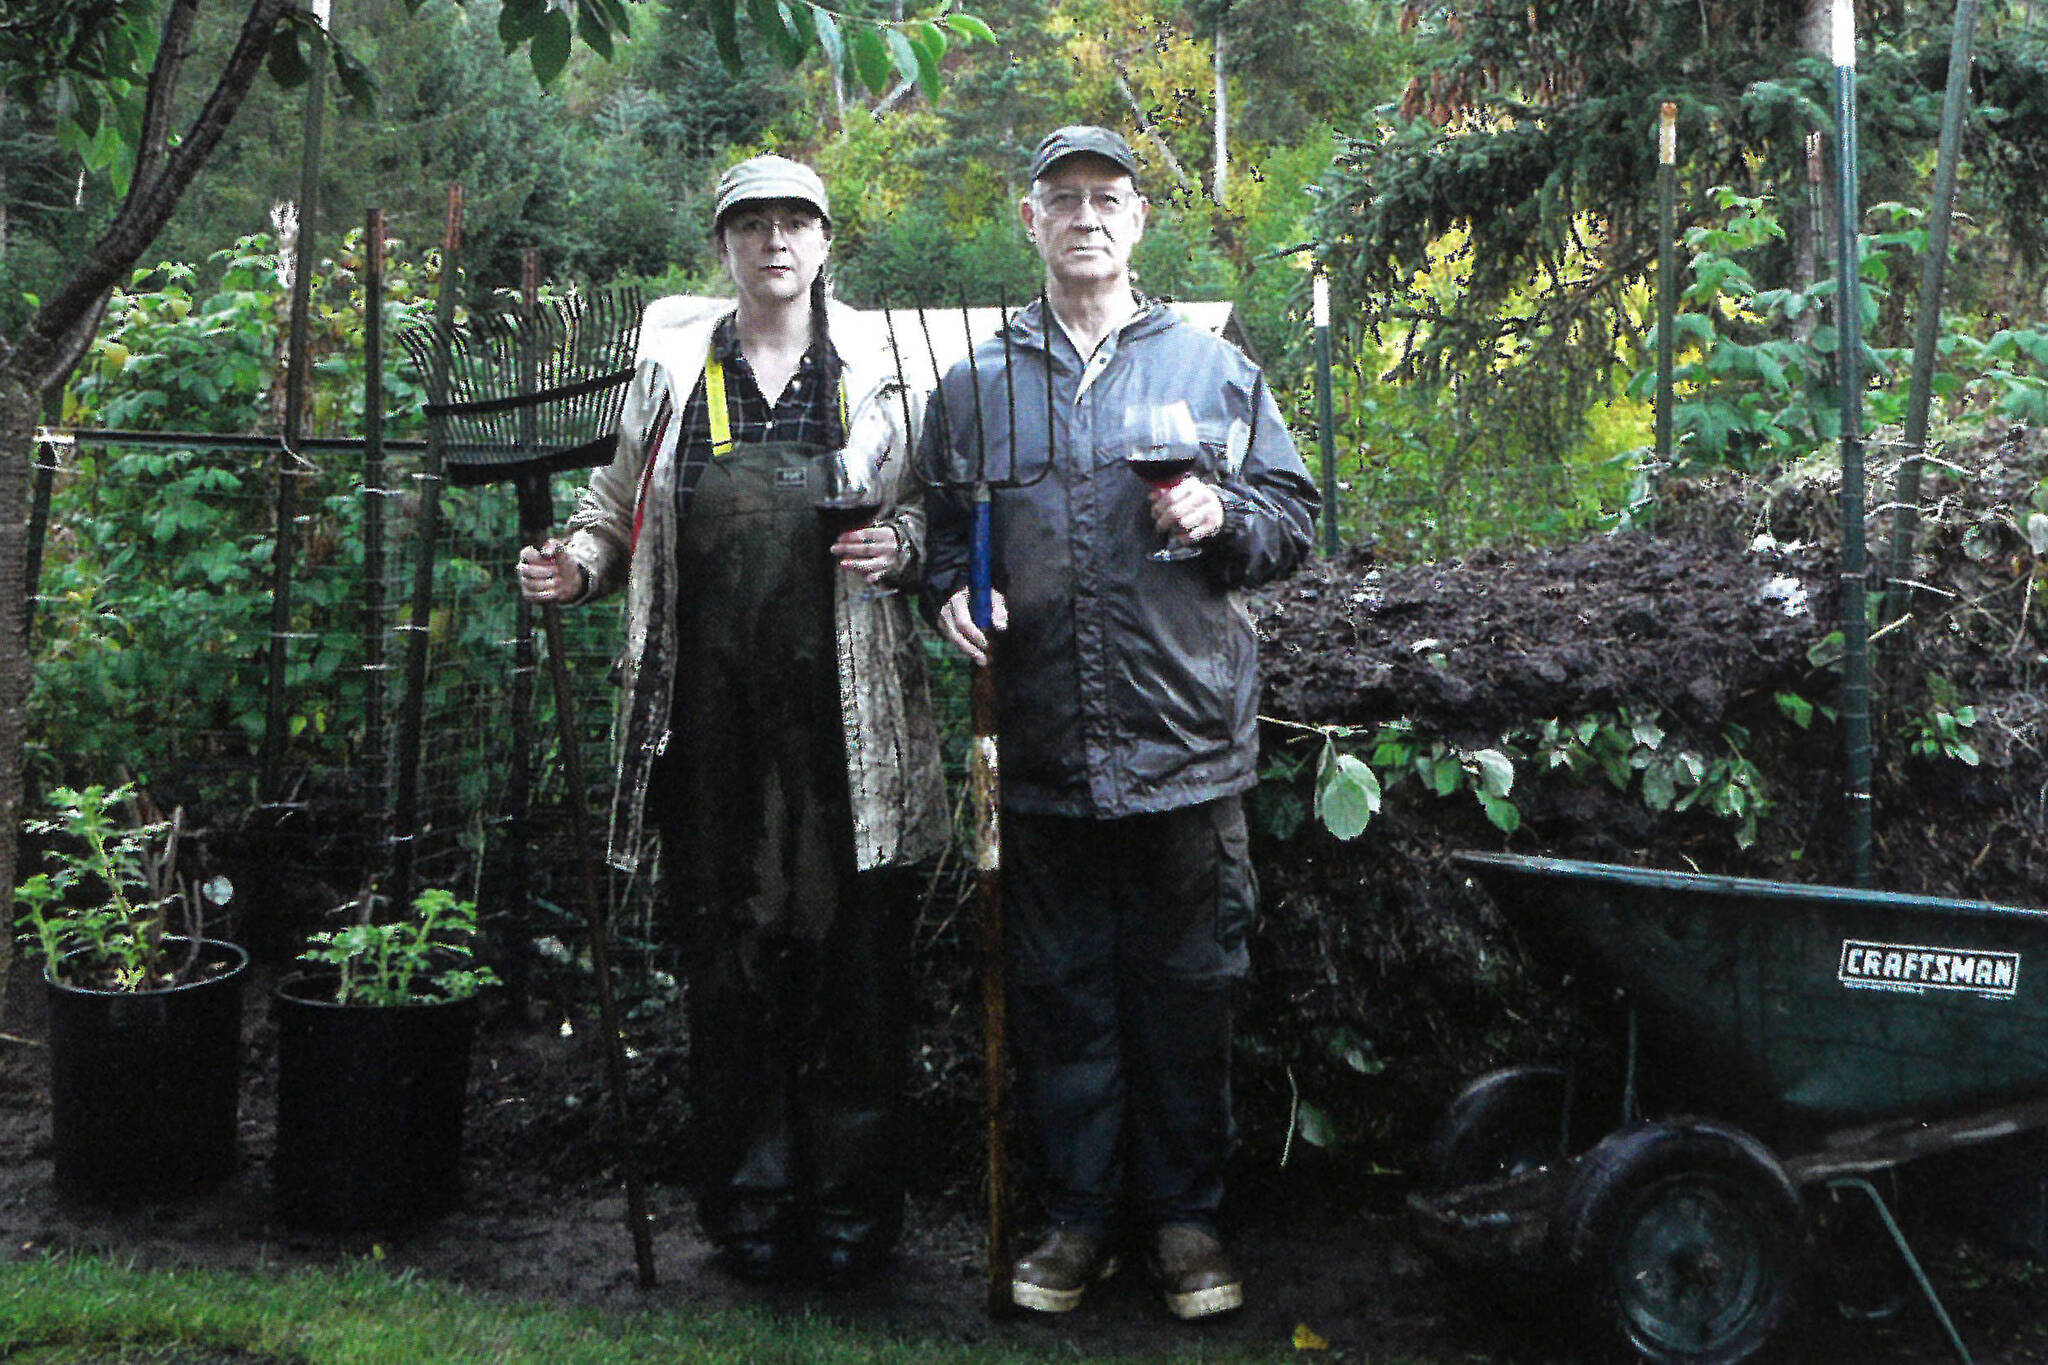 Shelli and Mike Gordon pose in October 2011 at their Halibut Cove, Alaska, home in an Alaska Gothic version of Grant Wood's "American Gothic" painting. (Photo courtesy of Mike Gordon)